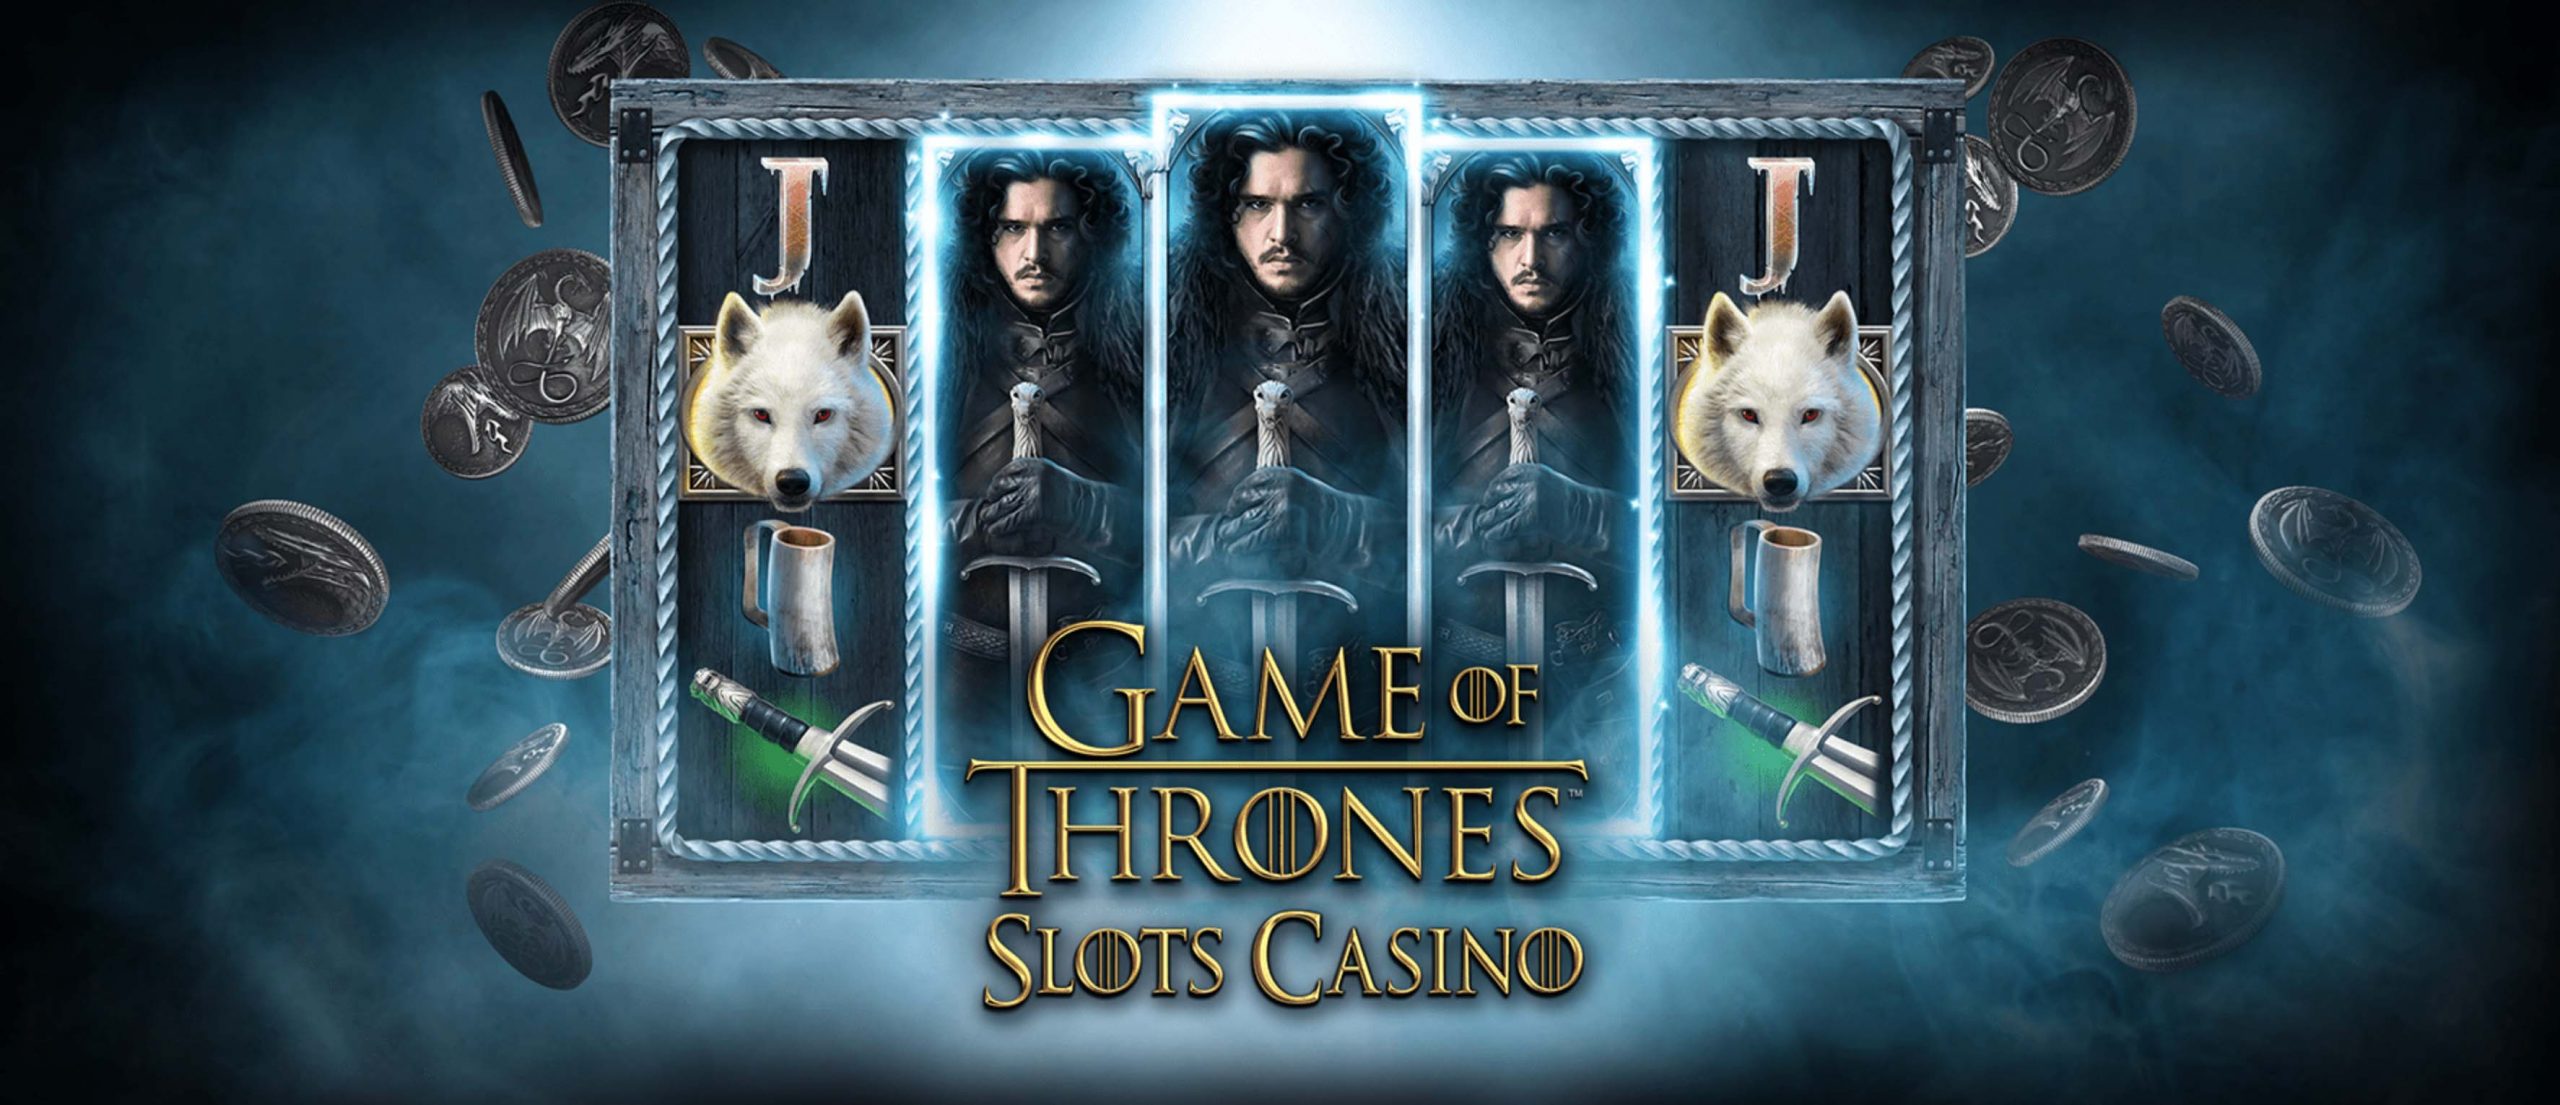 game of thrones slots free coins